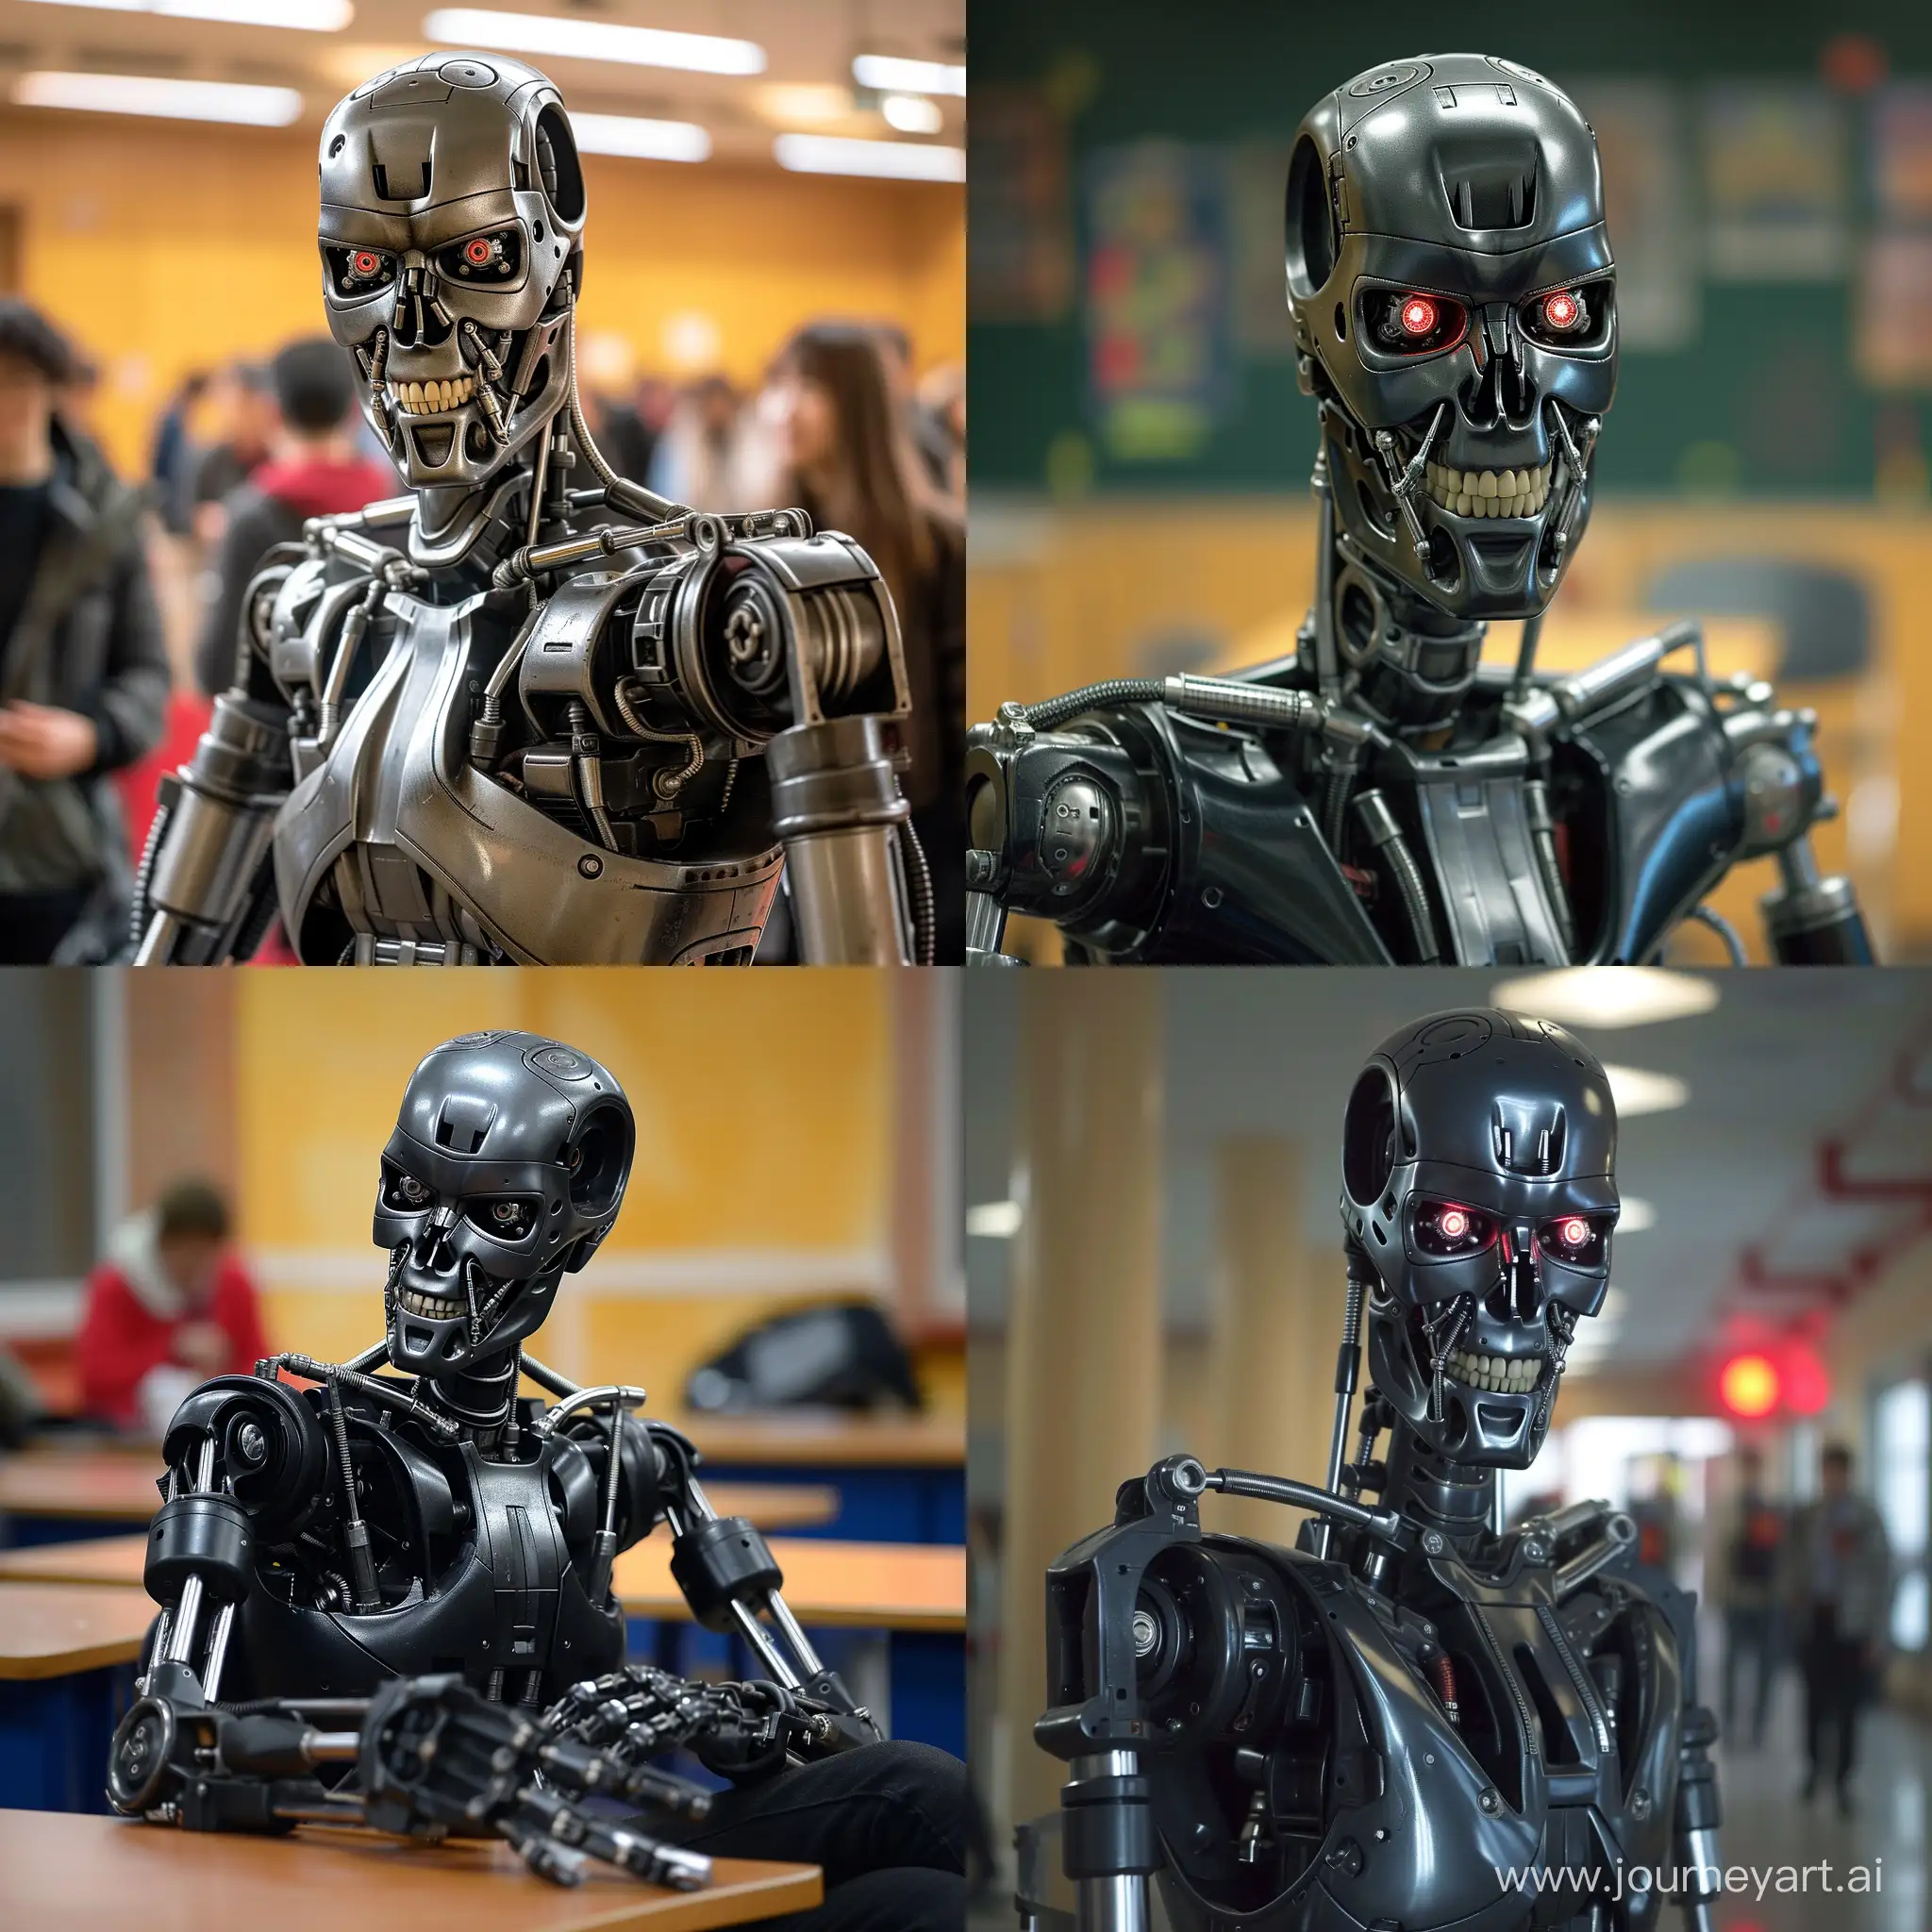 Mischievous-Terminator-T600-Causes-Chaos-at-School